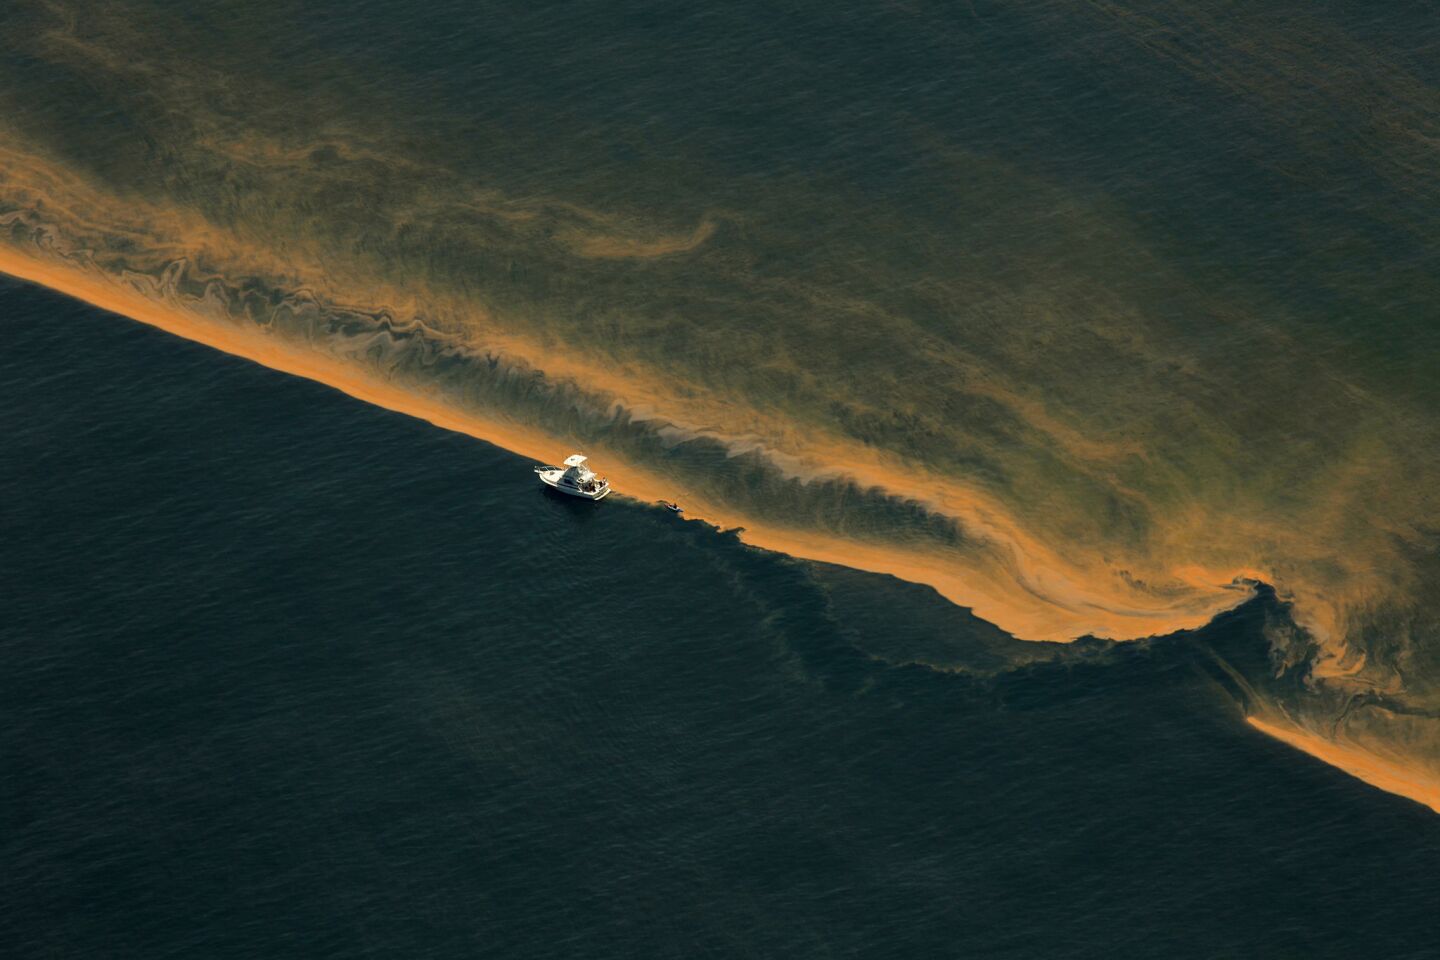 A boat makes its way along the edge of the oil spill in the Gulf of Mexico near the Chandeleur Islands on May 5, 2010. Oil reached the islands the following day, marking the first time it reached shore.